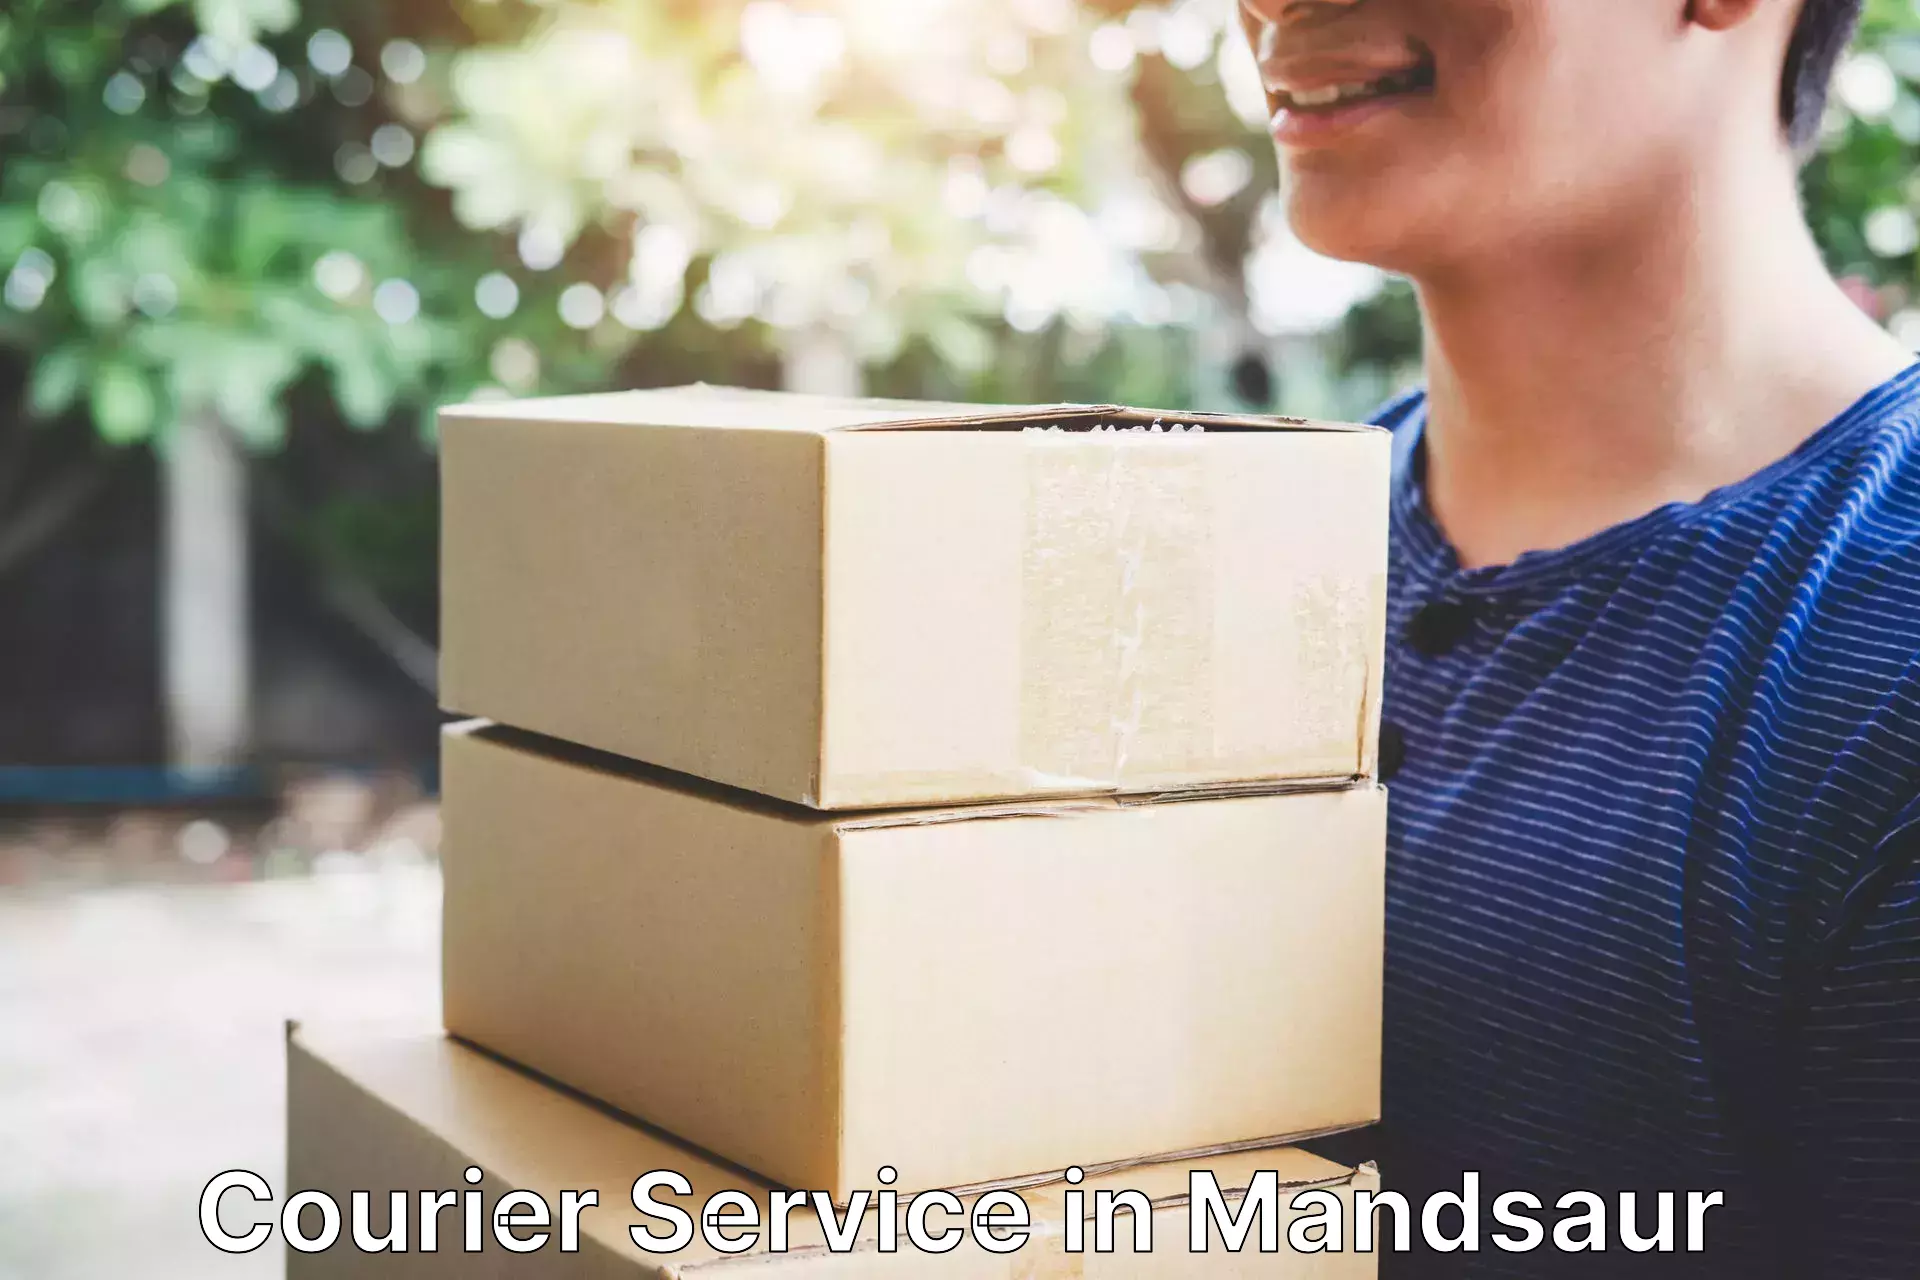 Subscription-based courier in Mandsaur